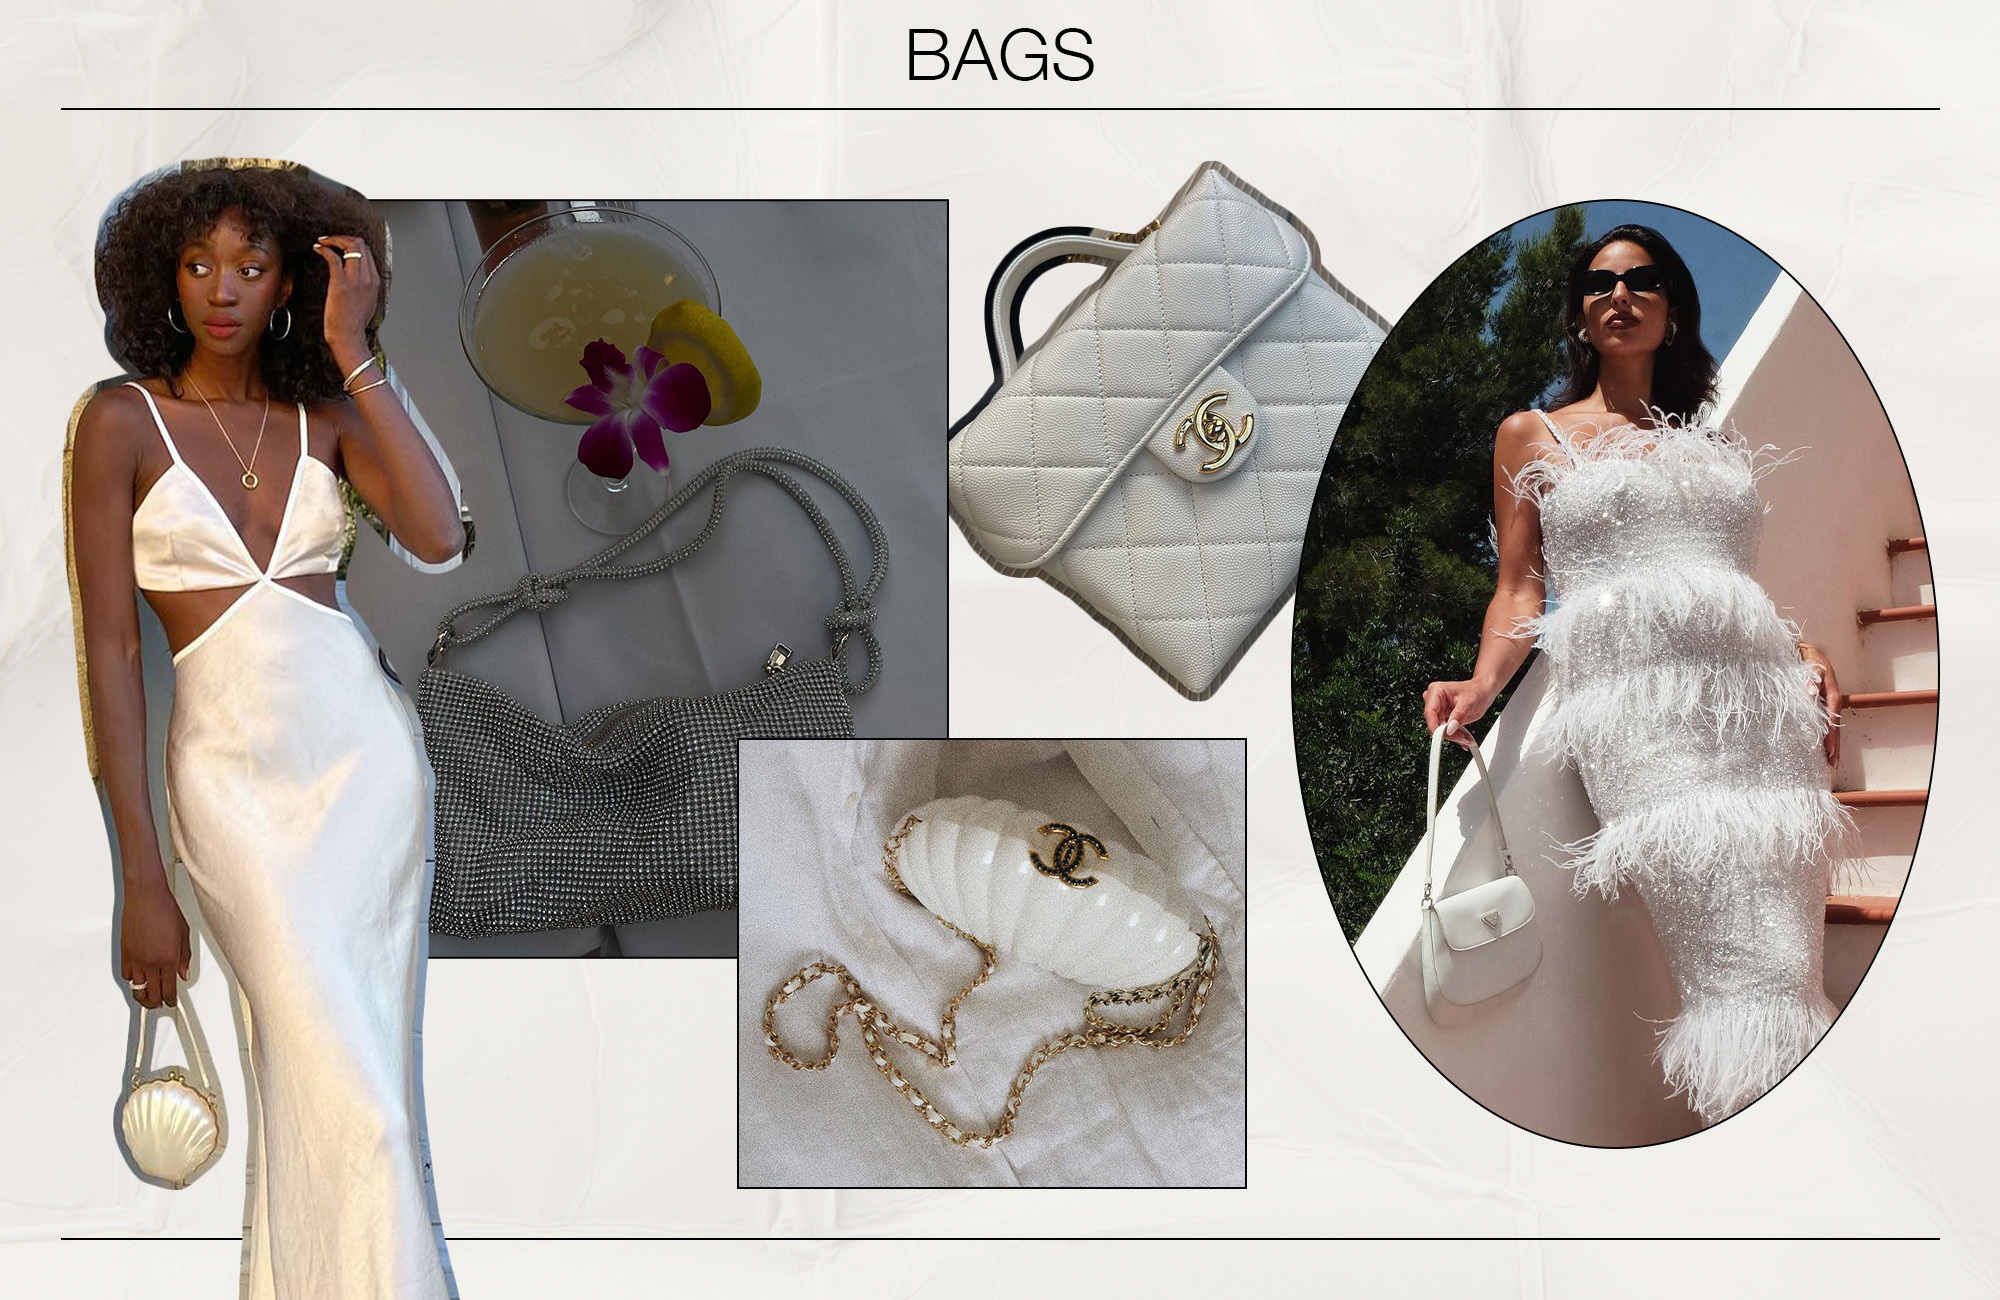 Woman in white dress, collage of handbags